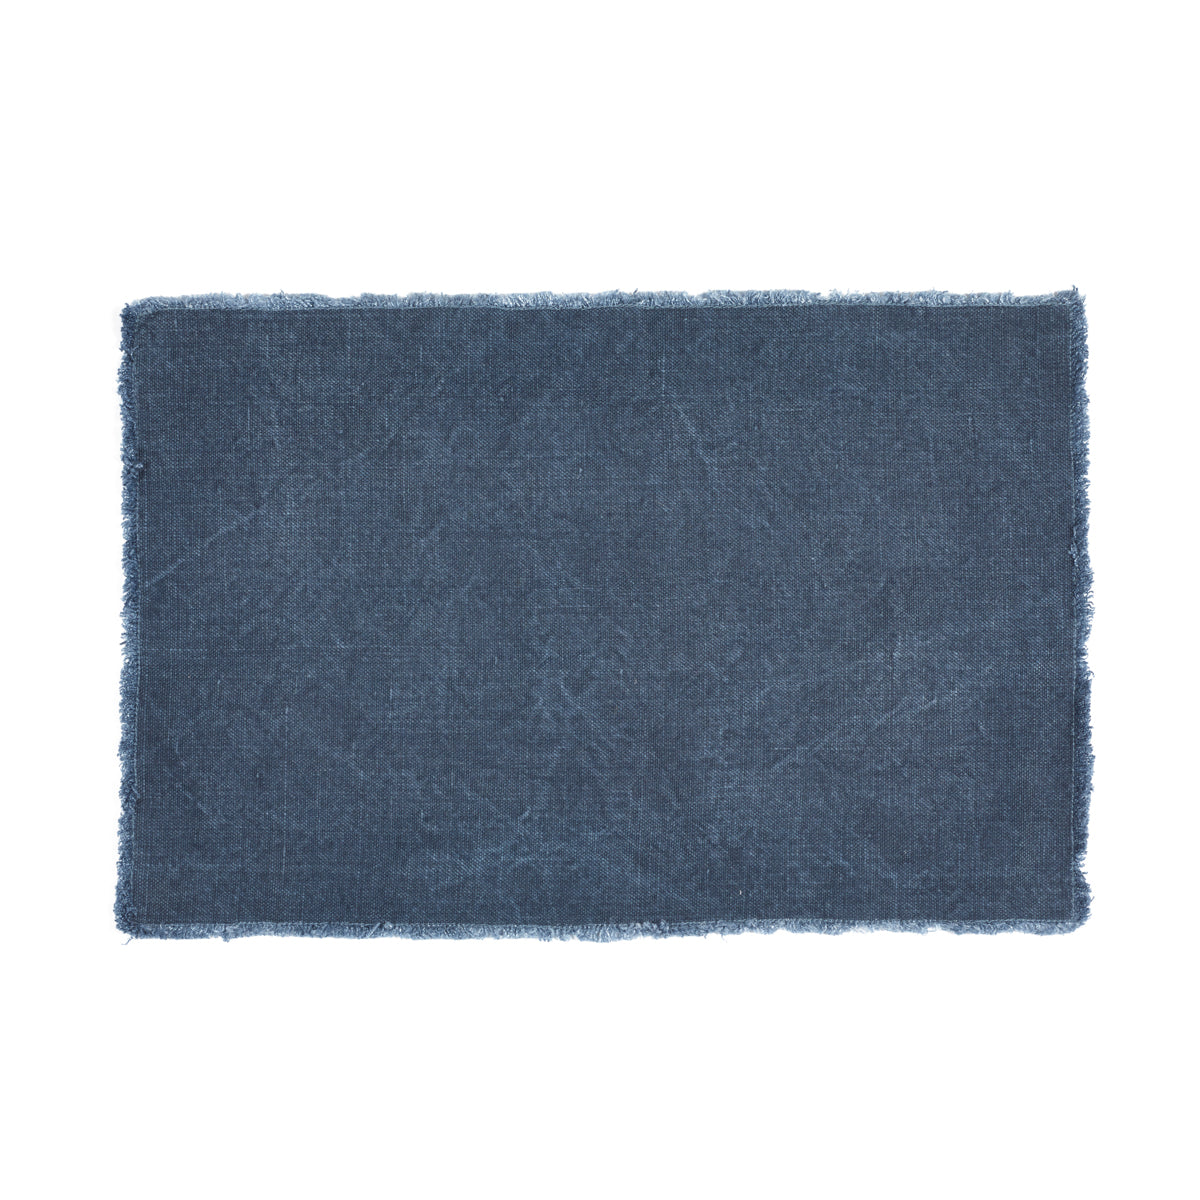 heavyweight linen placemat with frayed edge in petrol blue